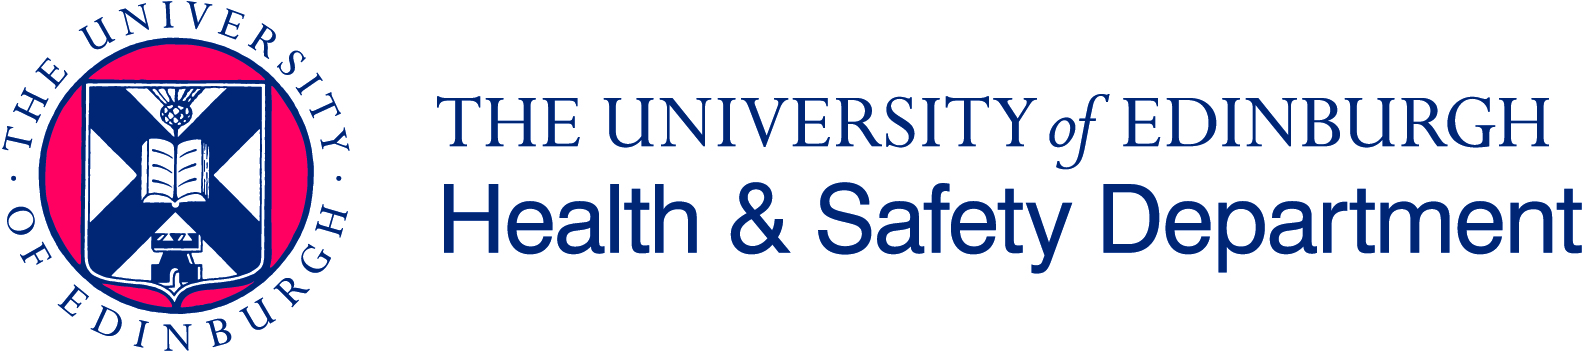 Health and Safety Department logo